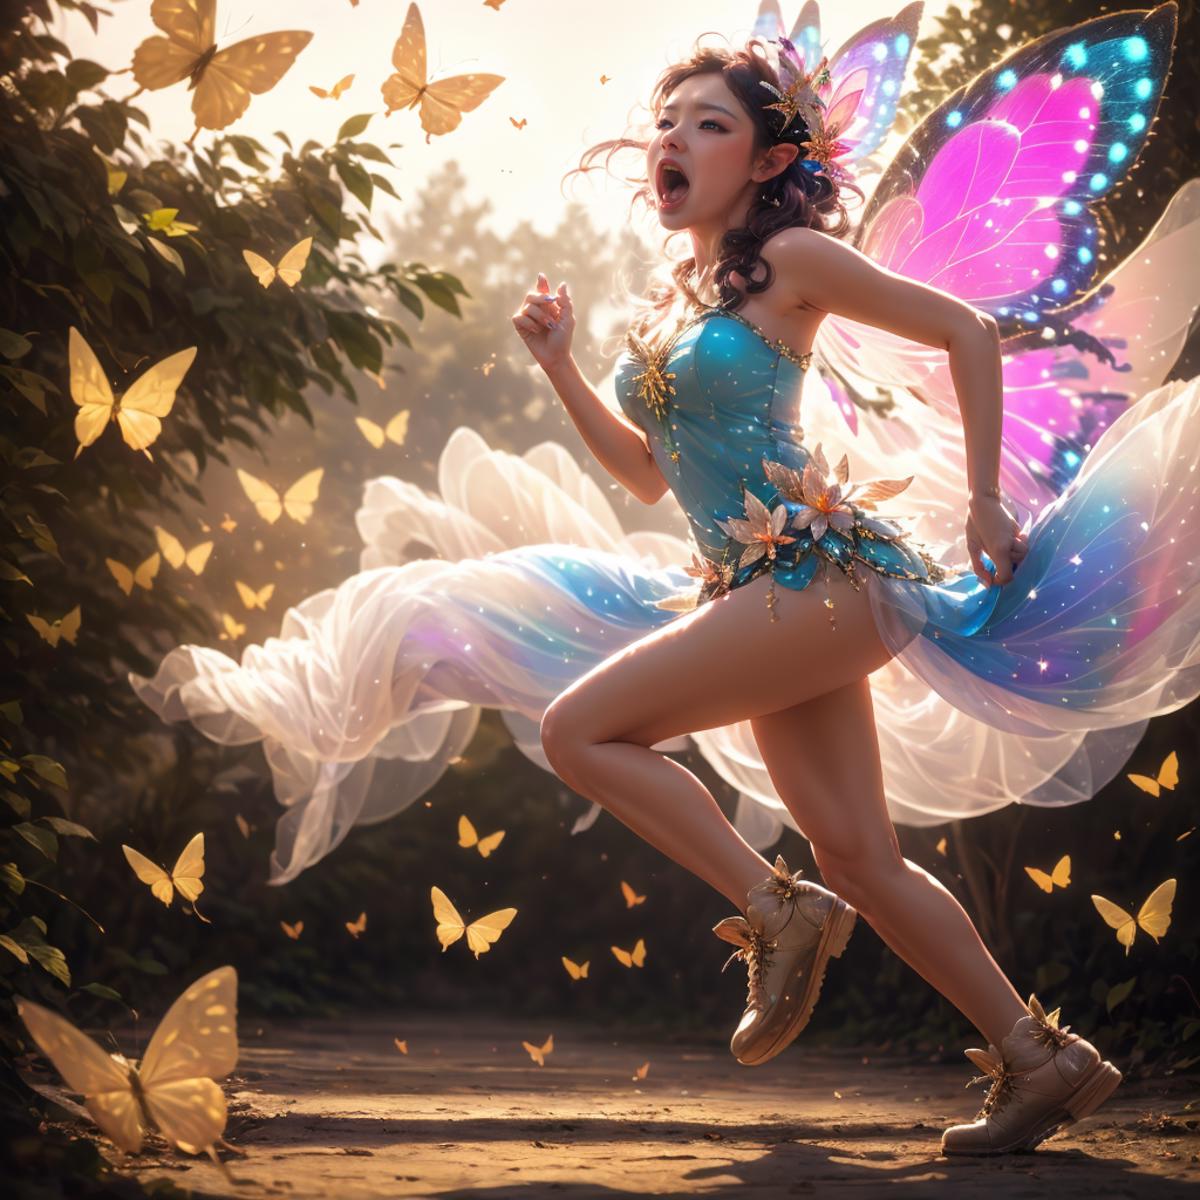 TCTH-Fairy image by buzimage